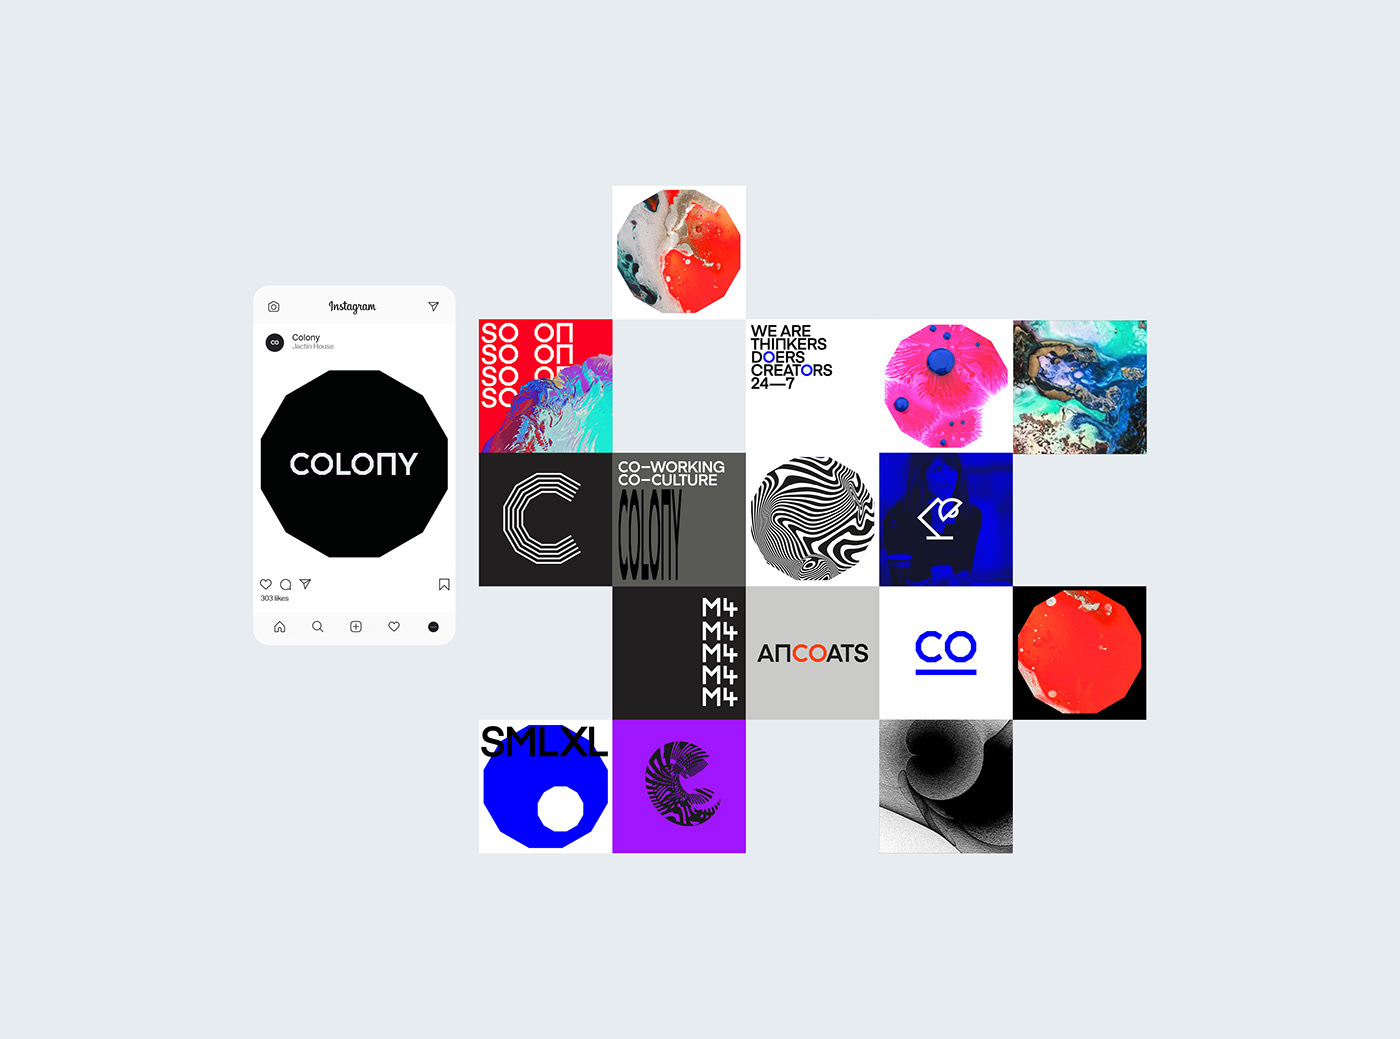 COLONY — Brand Identity & Implementation by Steven Waring and Martin James Power